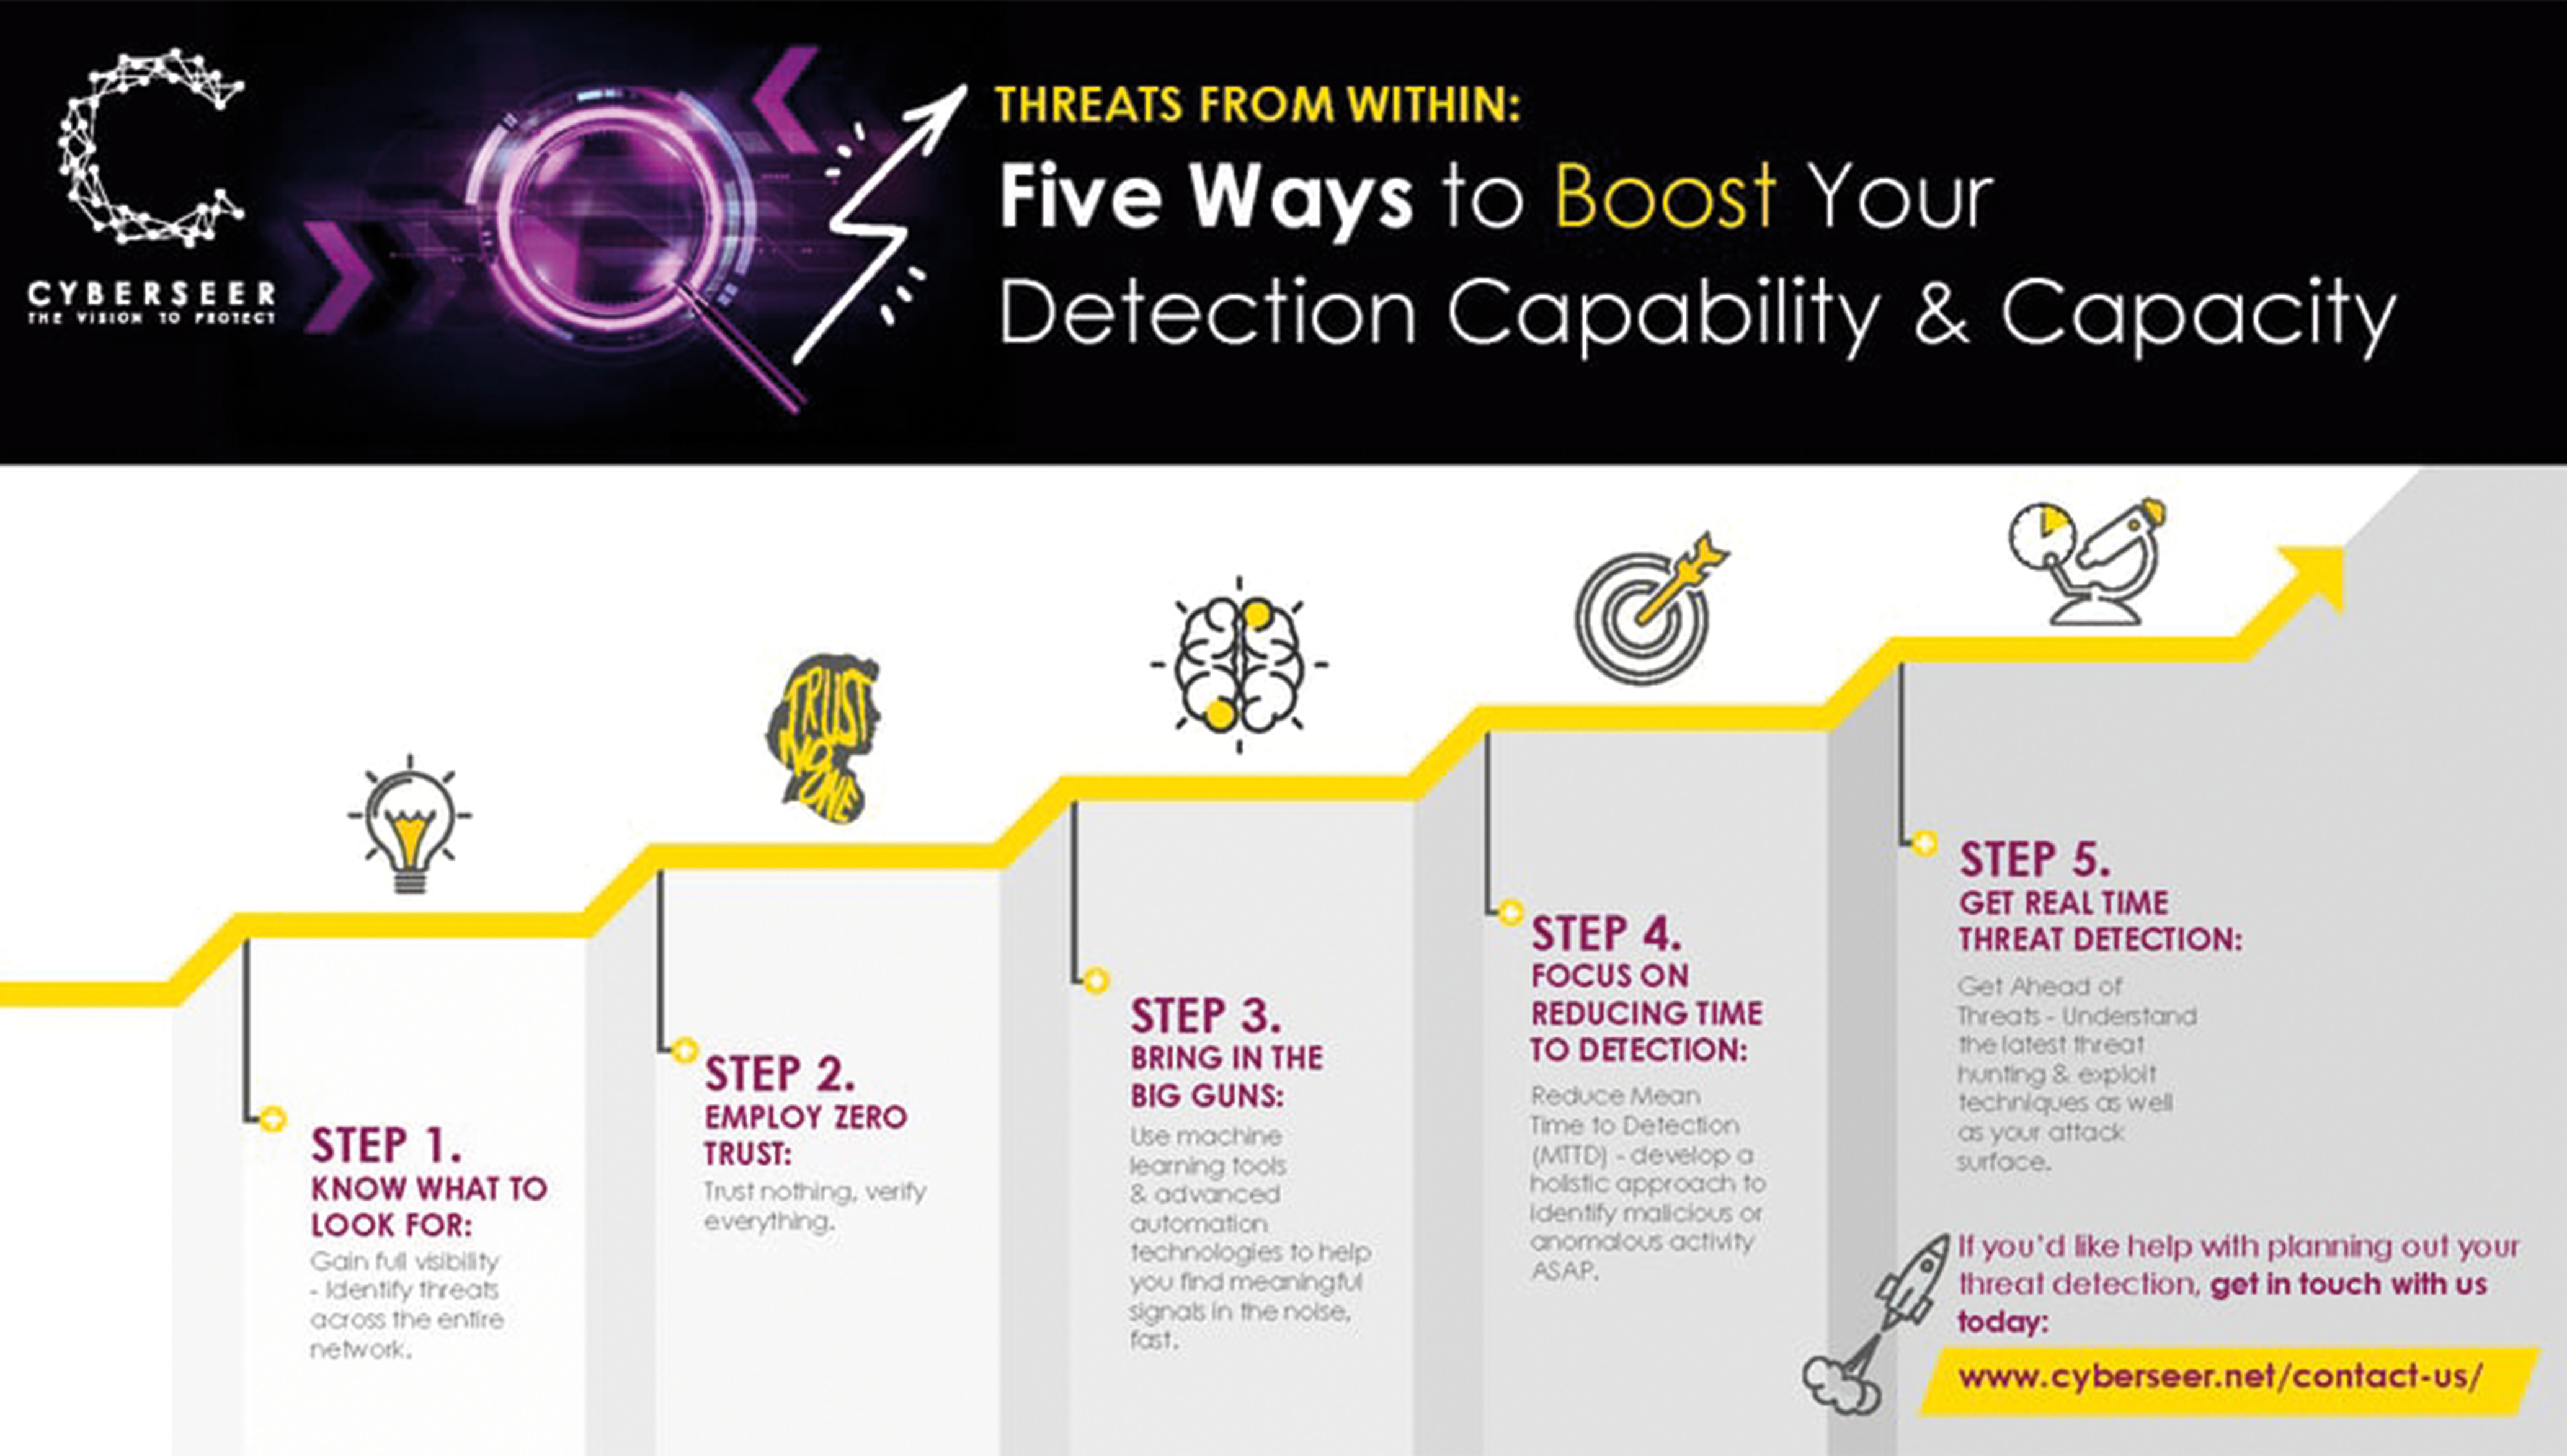 Five-ways-to-boost-your-threat-detection-capability-and-capacity-image